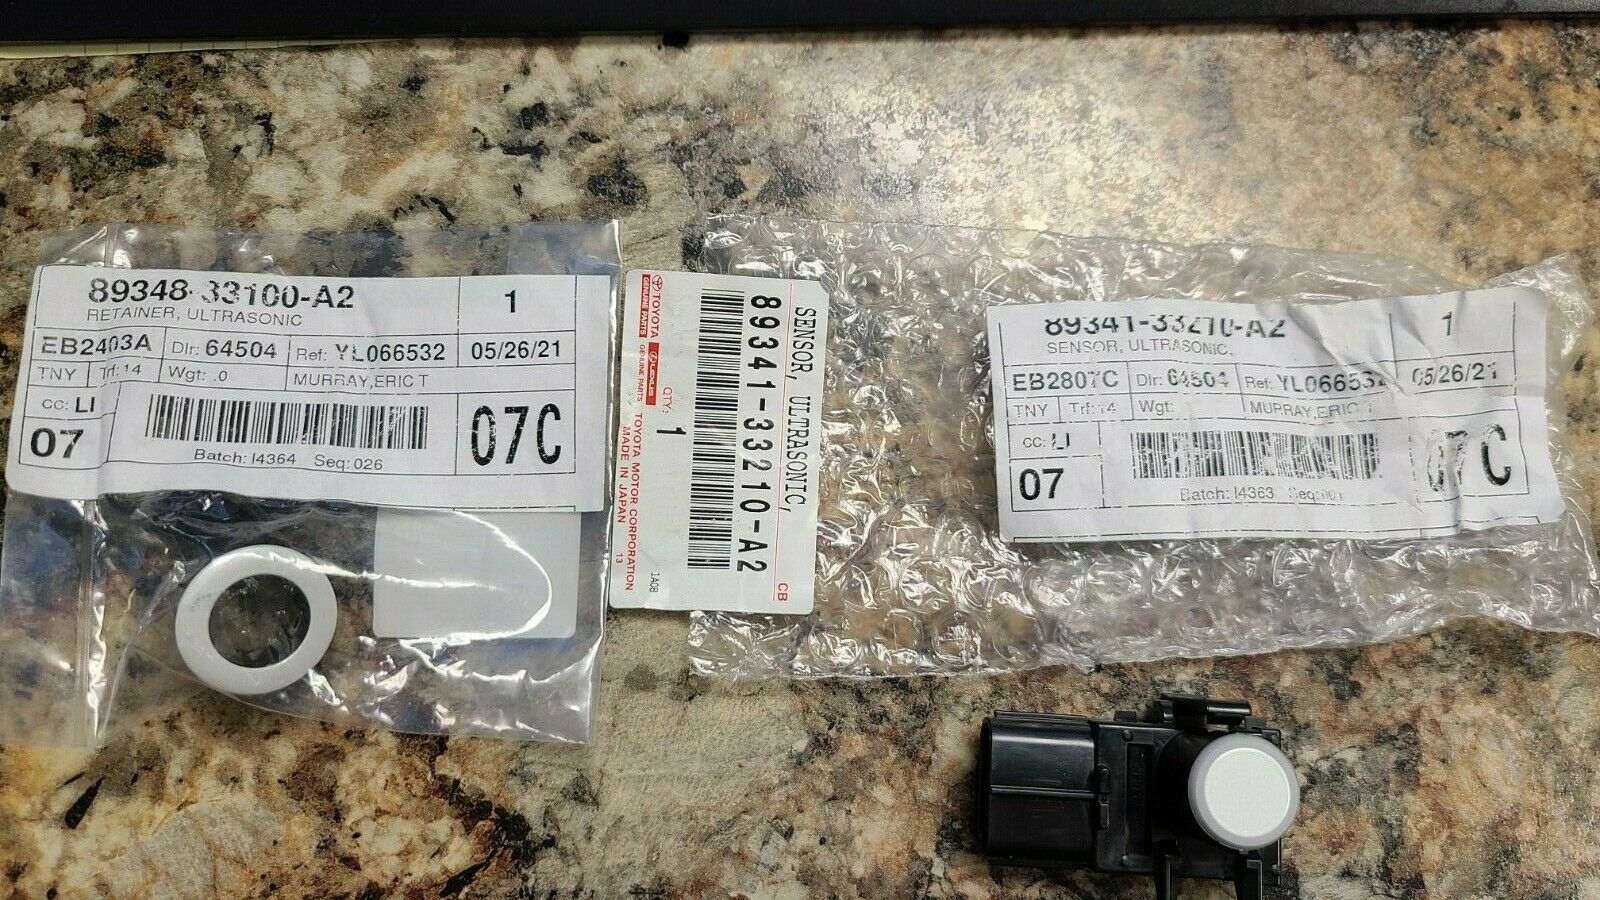 Lexus 89341-33210-a2 Oem Sensor, Ultrasonic With Retainer 89348-33100-a2 New